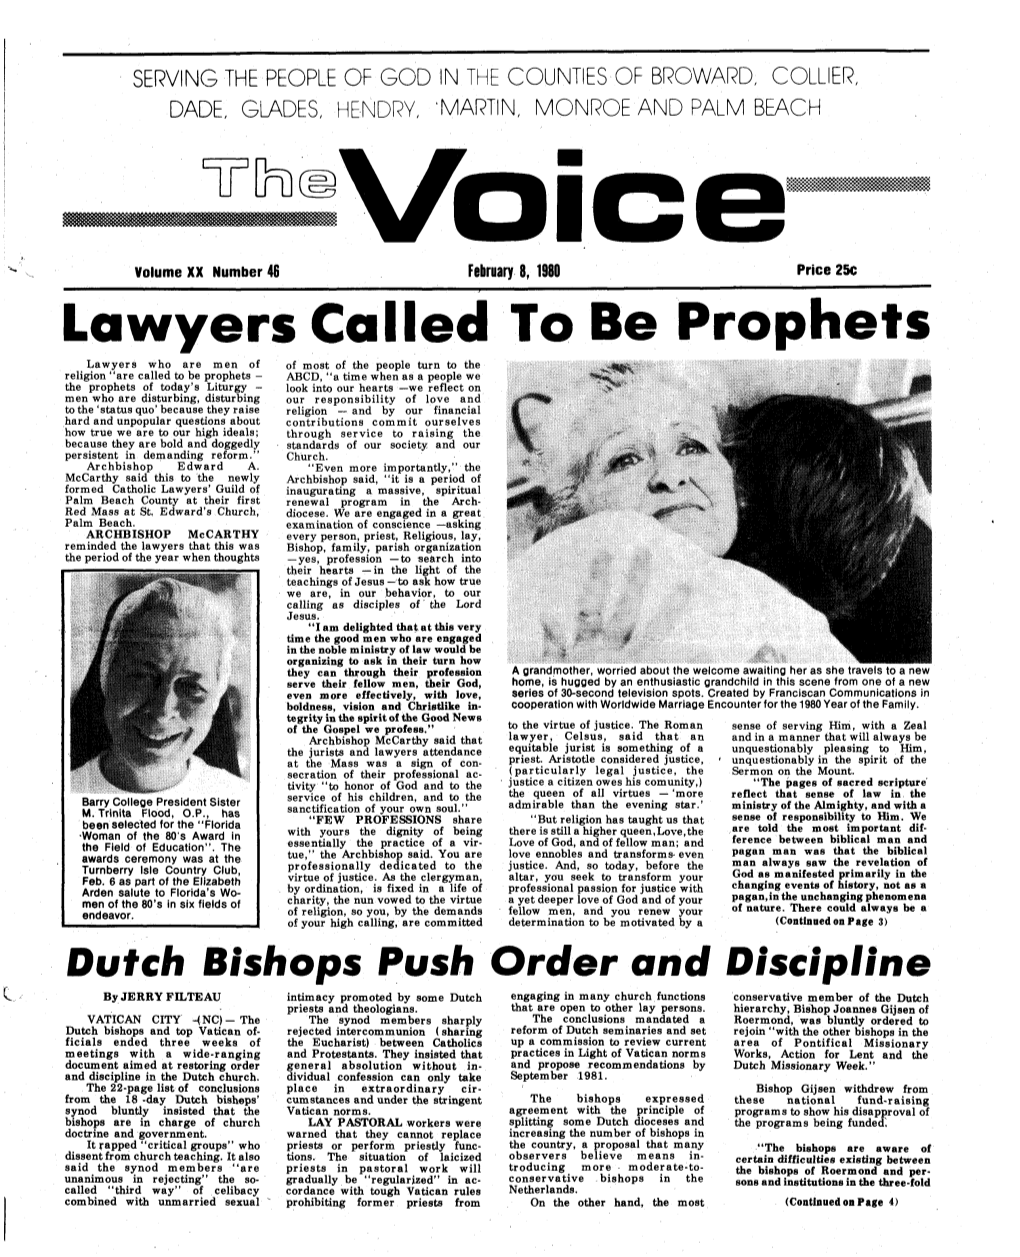 Lawyers Called to Be Prophets